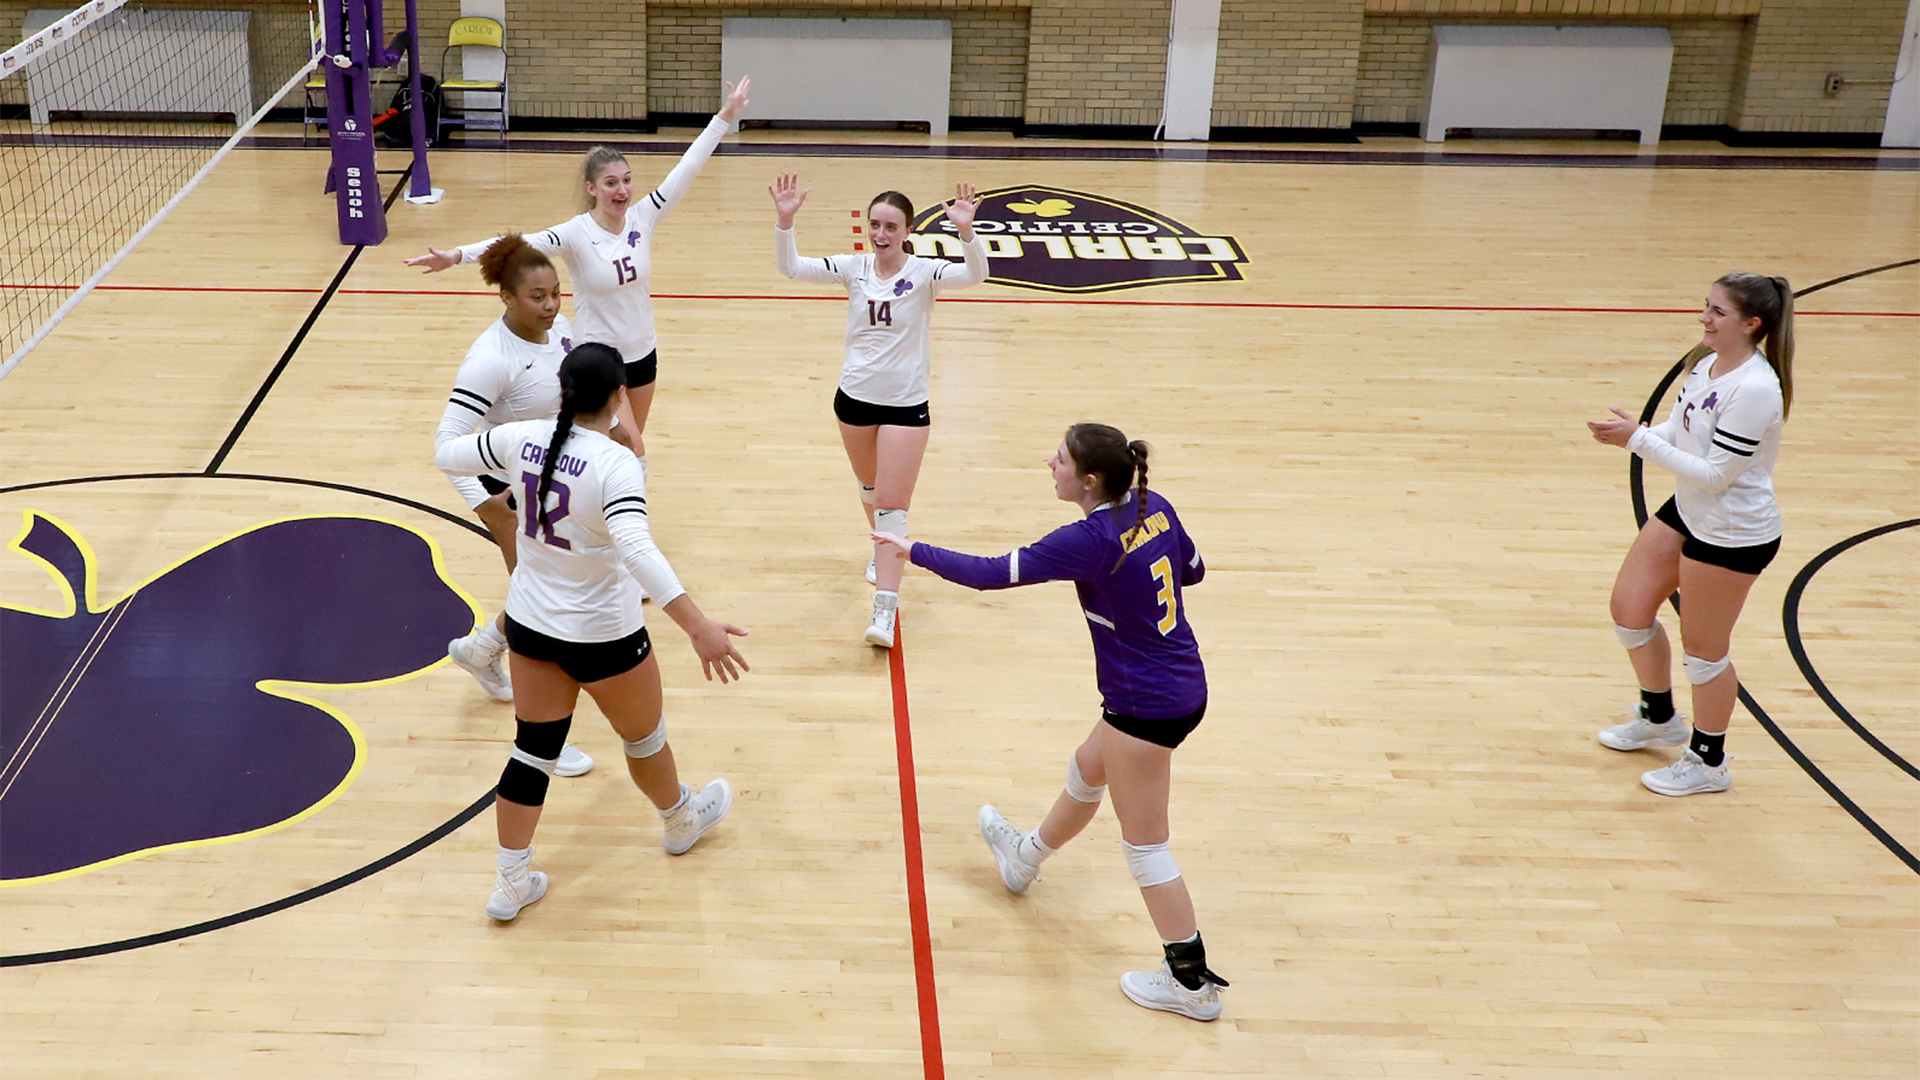 The team celebrates a point. Photo by Robert Cifone.